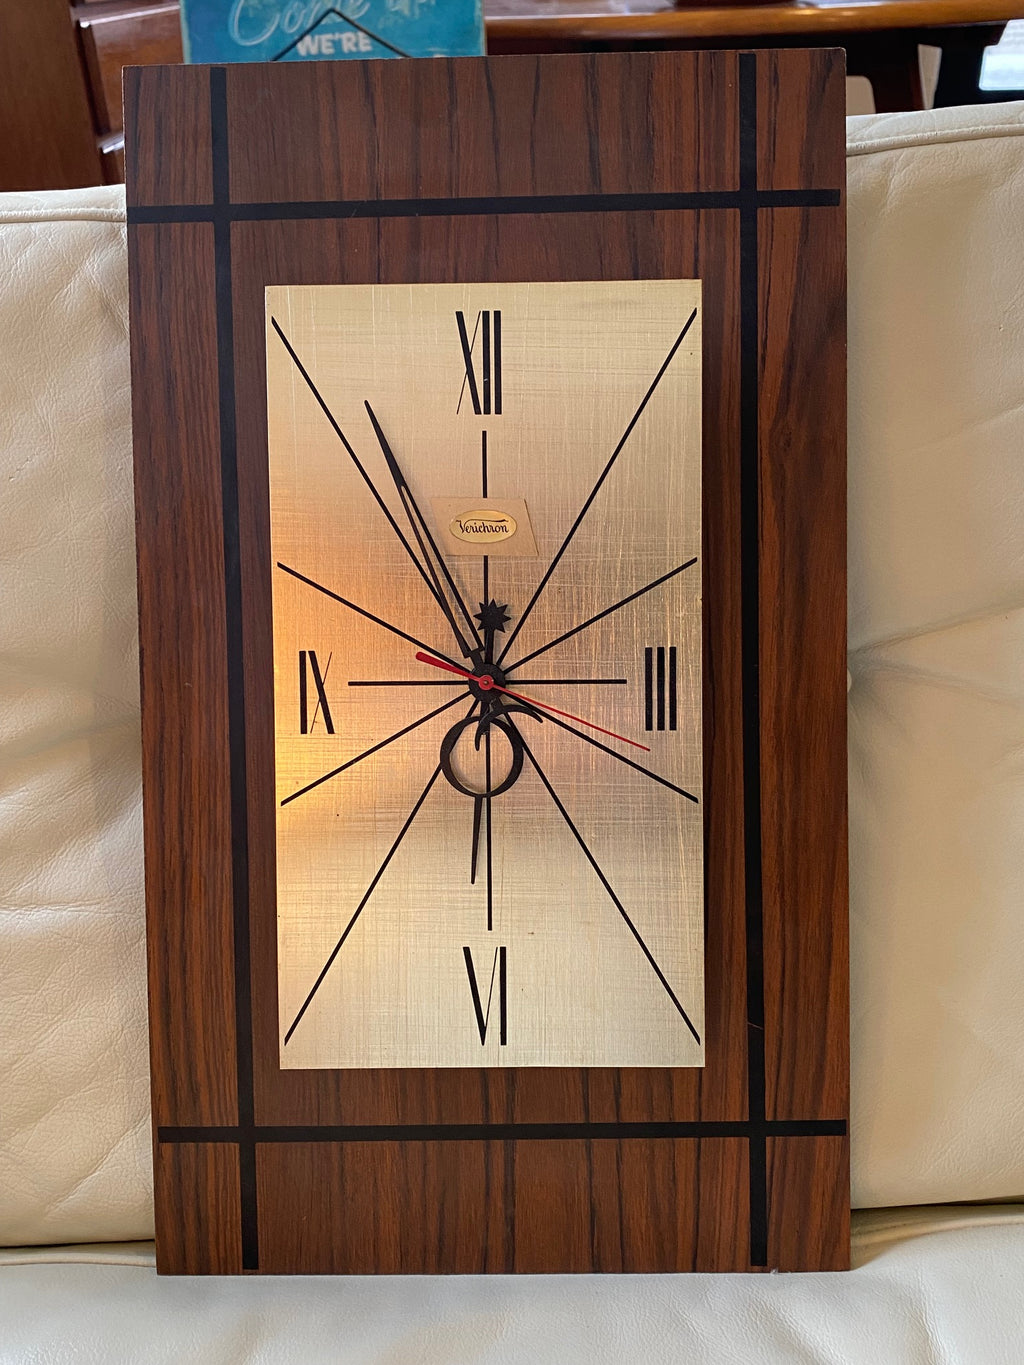 Verichon Battery Operated Wall Clock- Cook Street Vintage